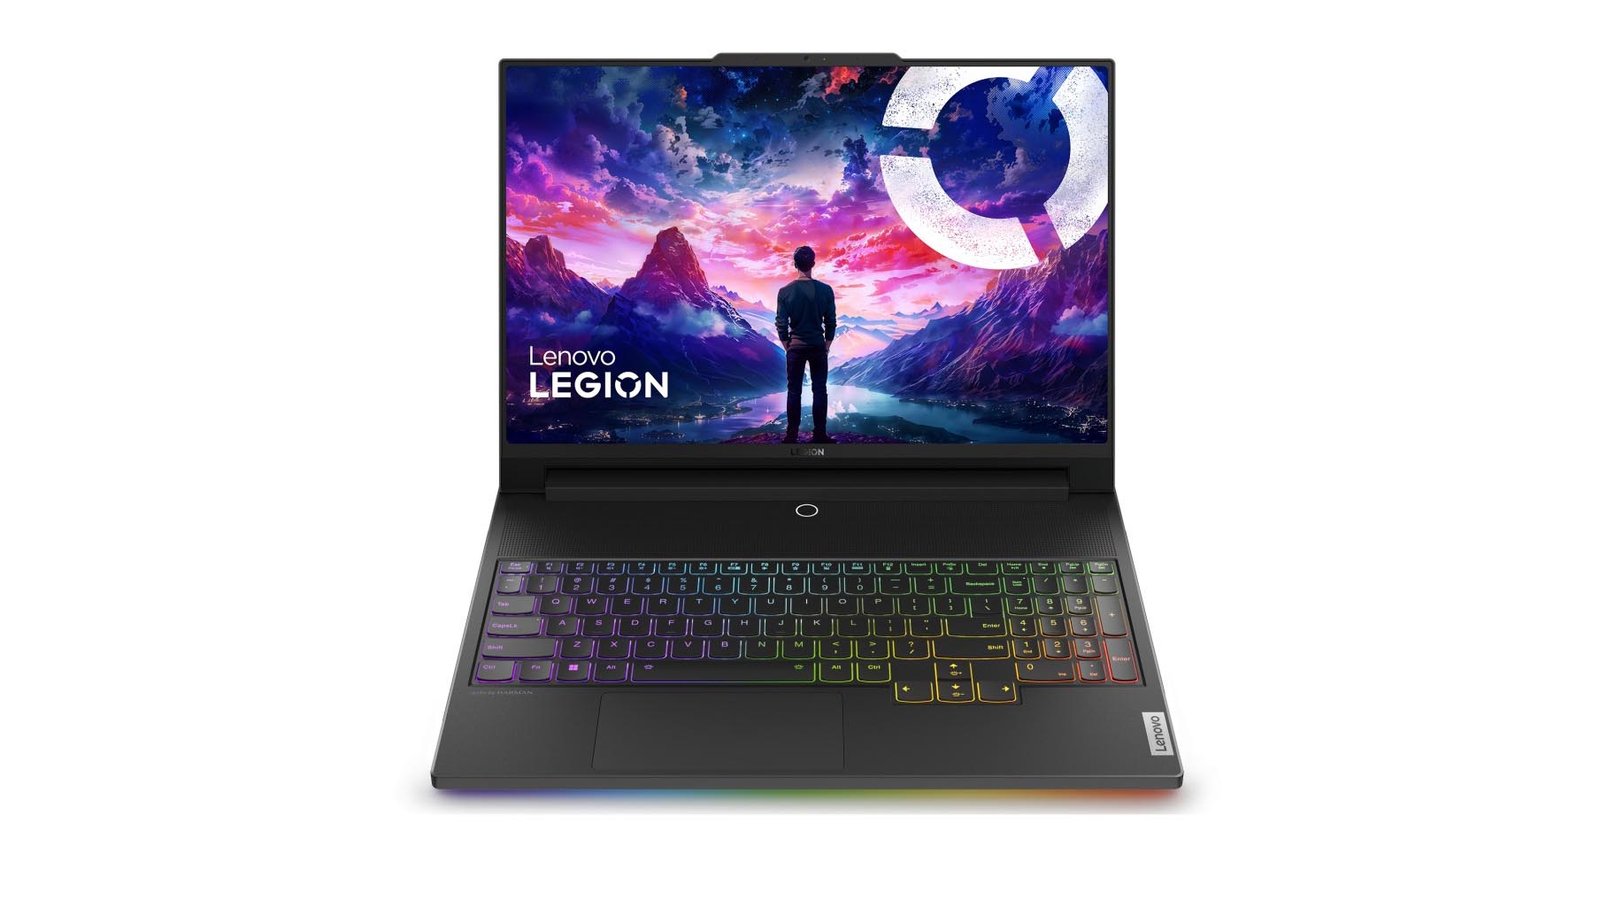 The King of Cool: Lenovo Introduces the Legion 9i, the World's First  AI-Tuned Gaming Laptop with Integrated Liquid-Cooling System - Lenovo  StoryHub